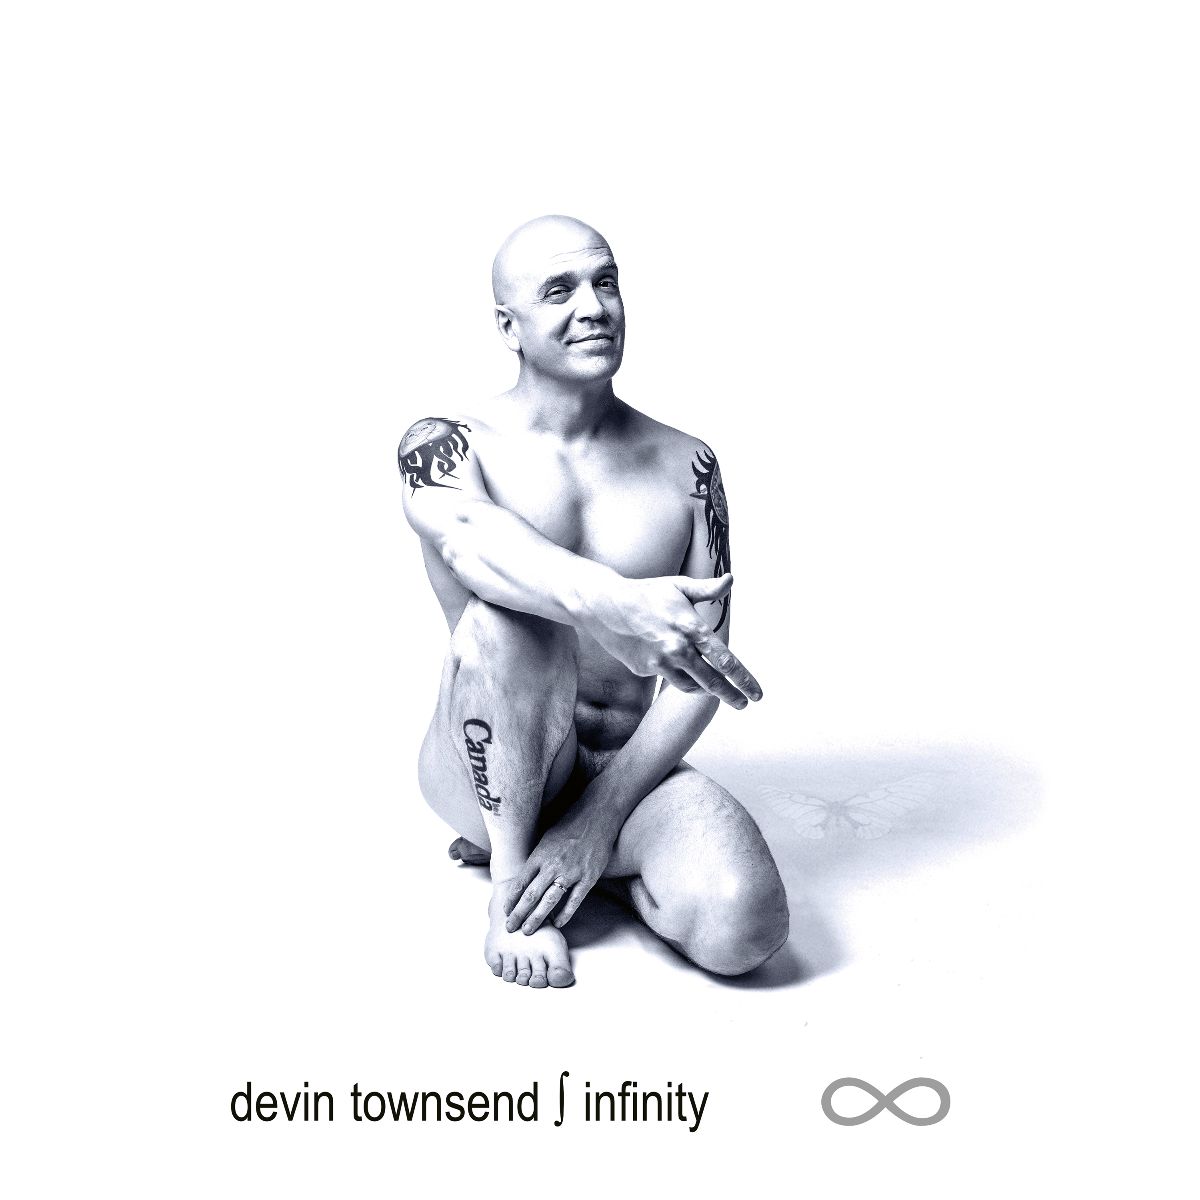 DEVIN TOWNSEND – remastered & expanded 25th anniversary edition of ‘Infinity’